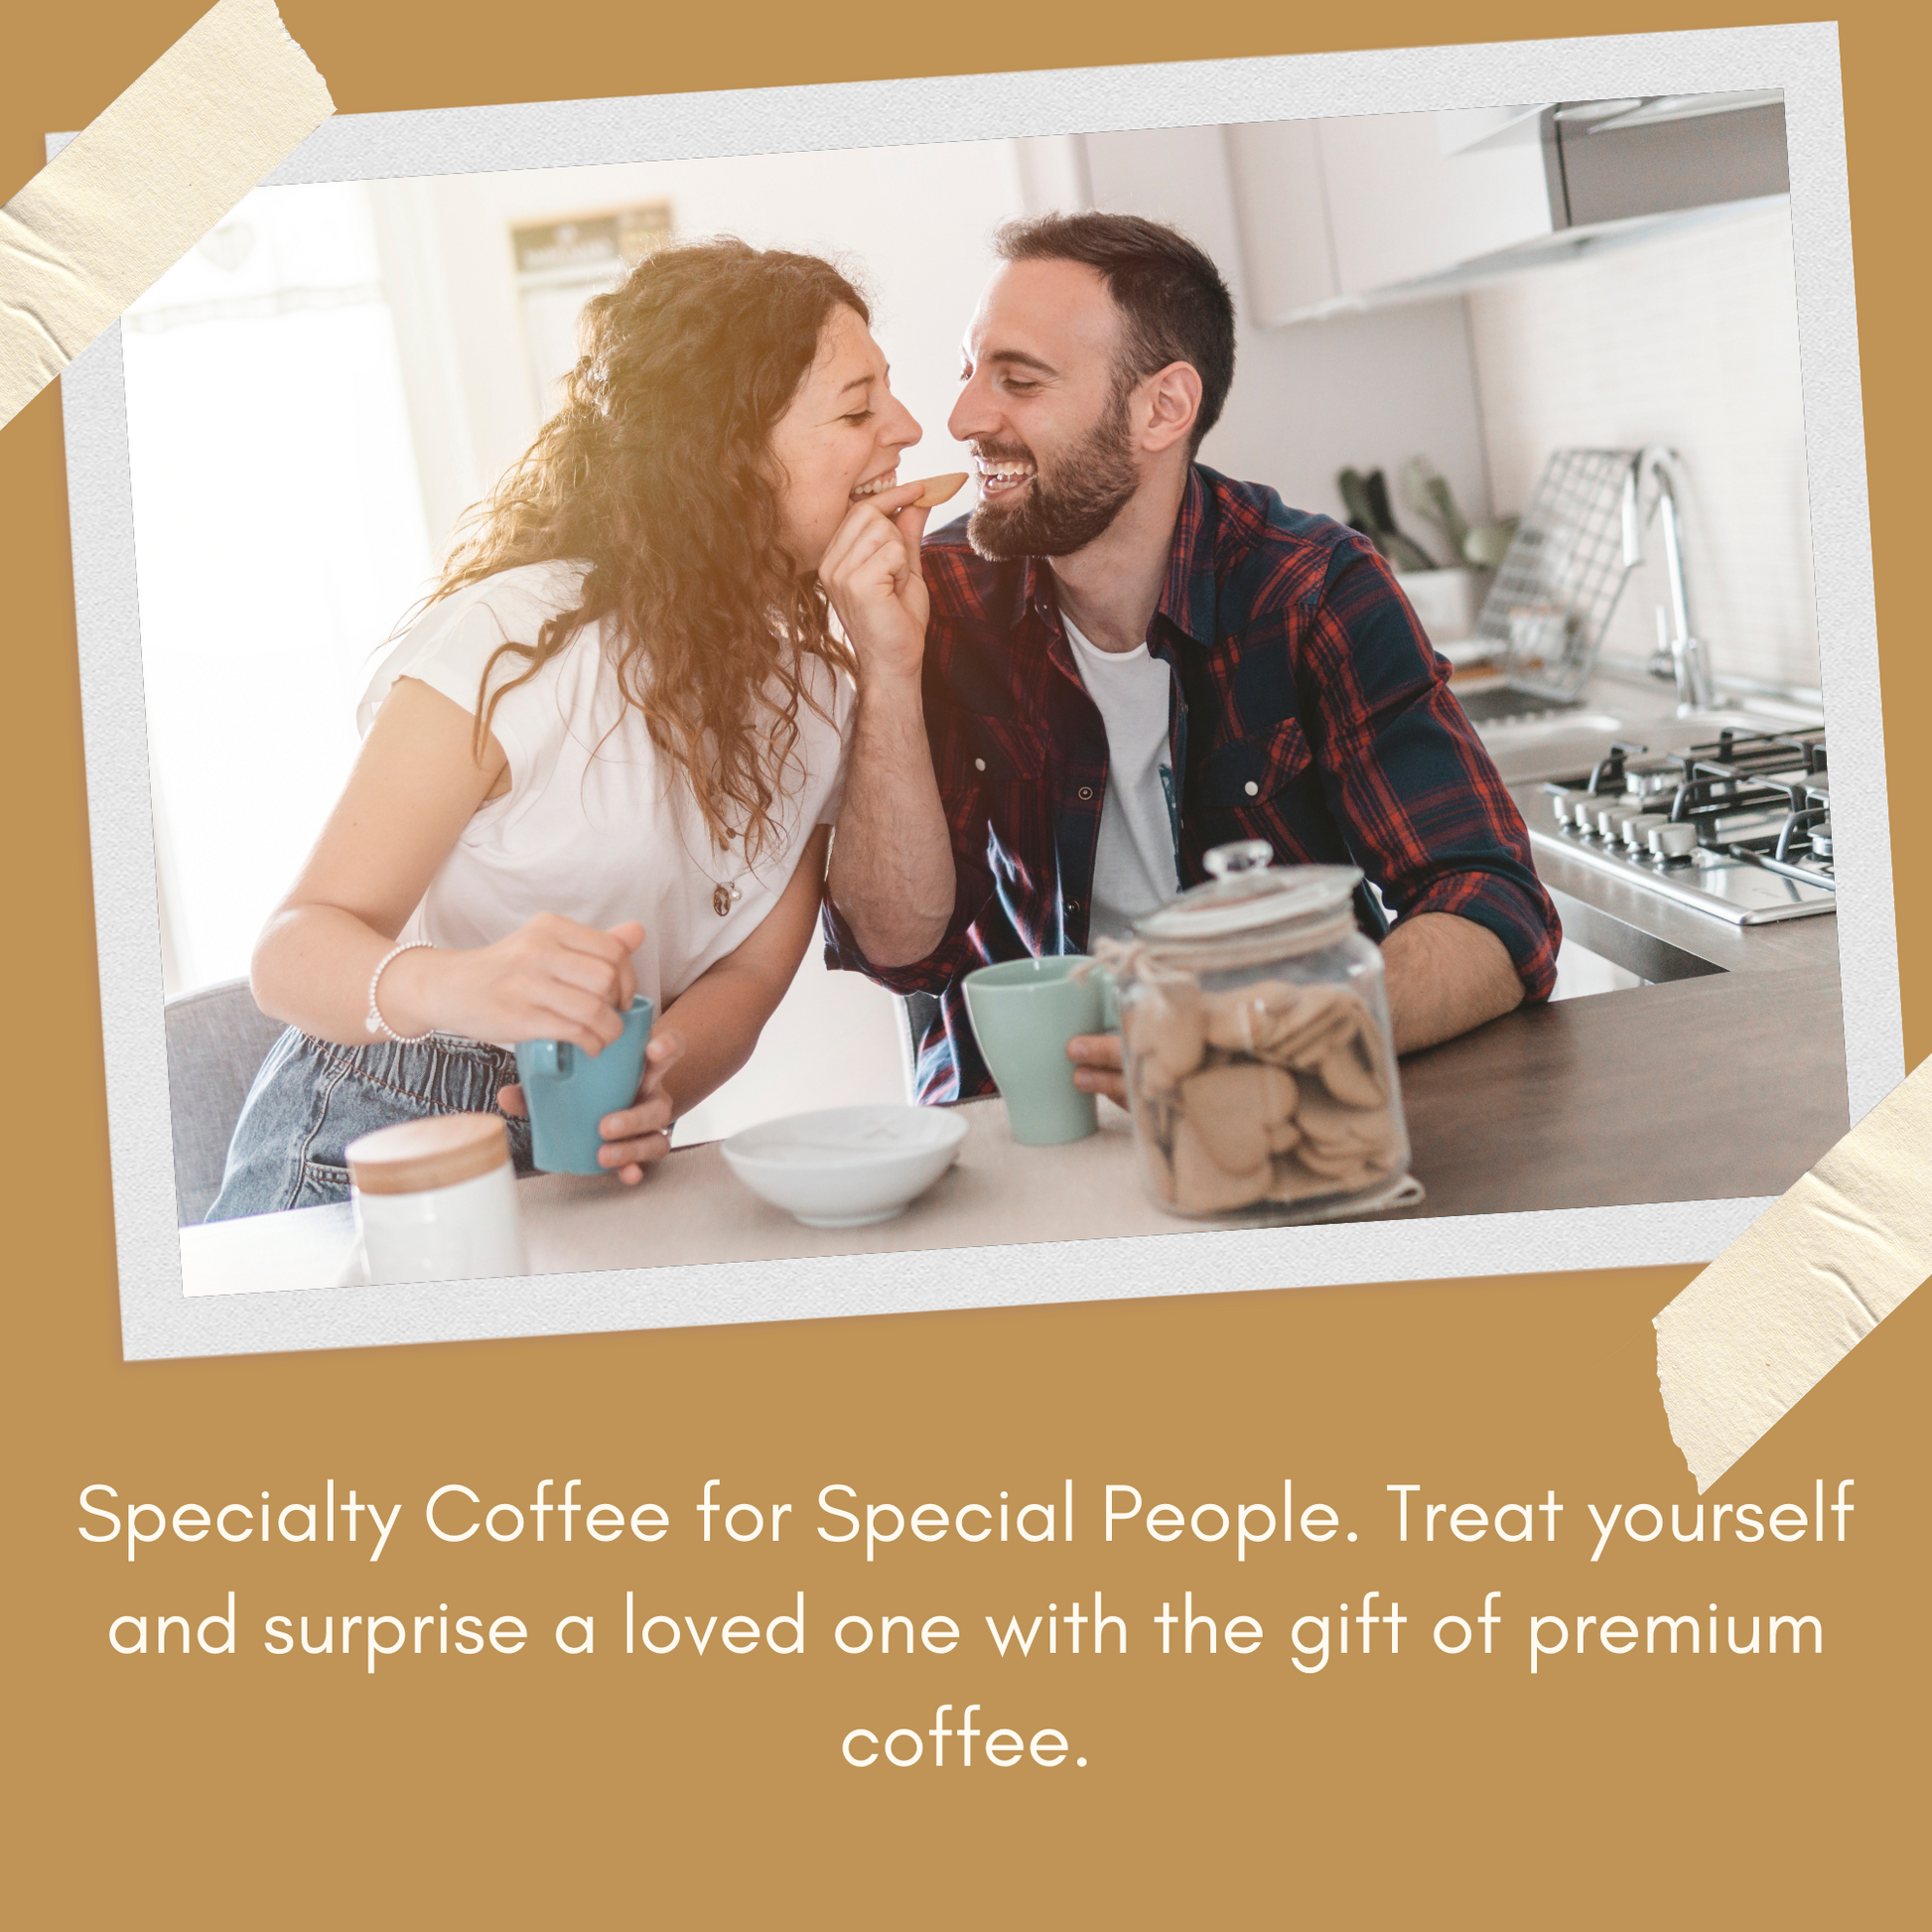 A smiling couple enjoying coffee together in their kitchen, with text overlay reading: 'Specialty Coffee for Special People. Treat yourself and surprise a loved one with the gift of premium coffee.